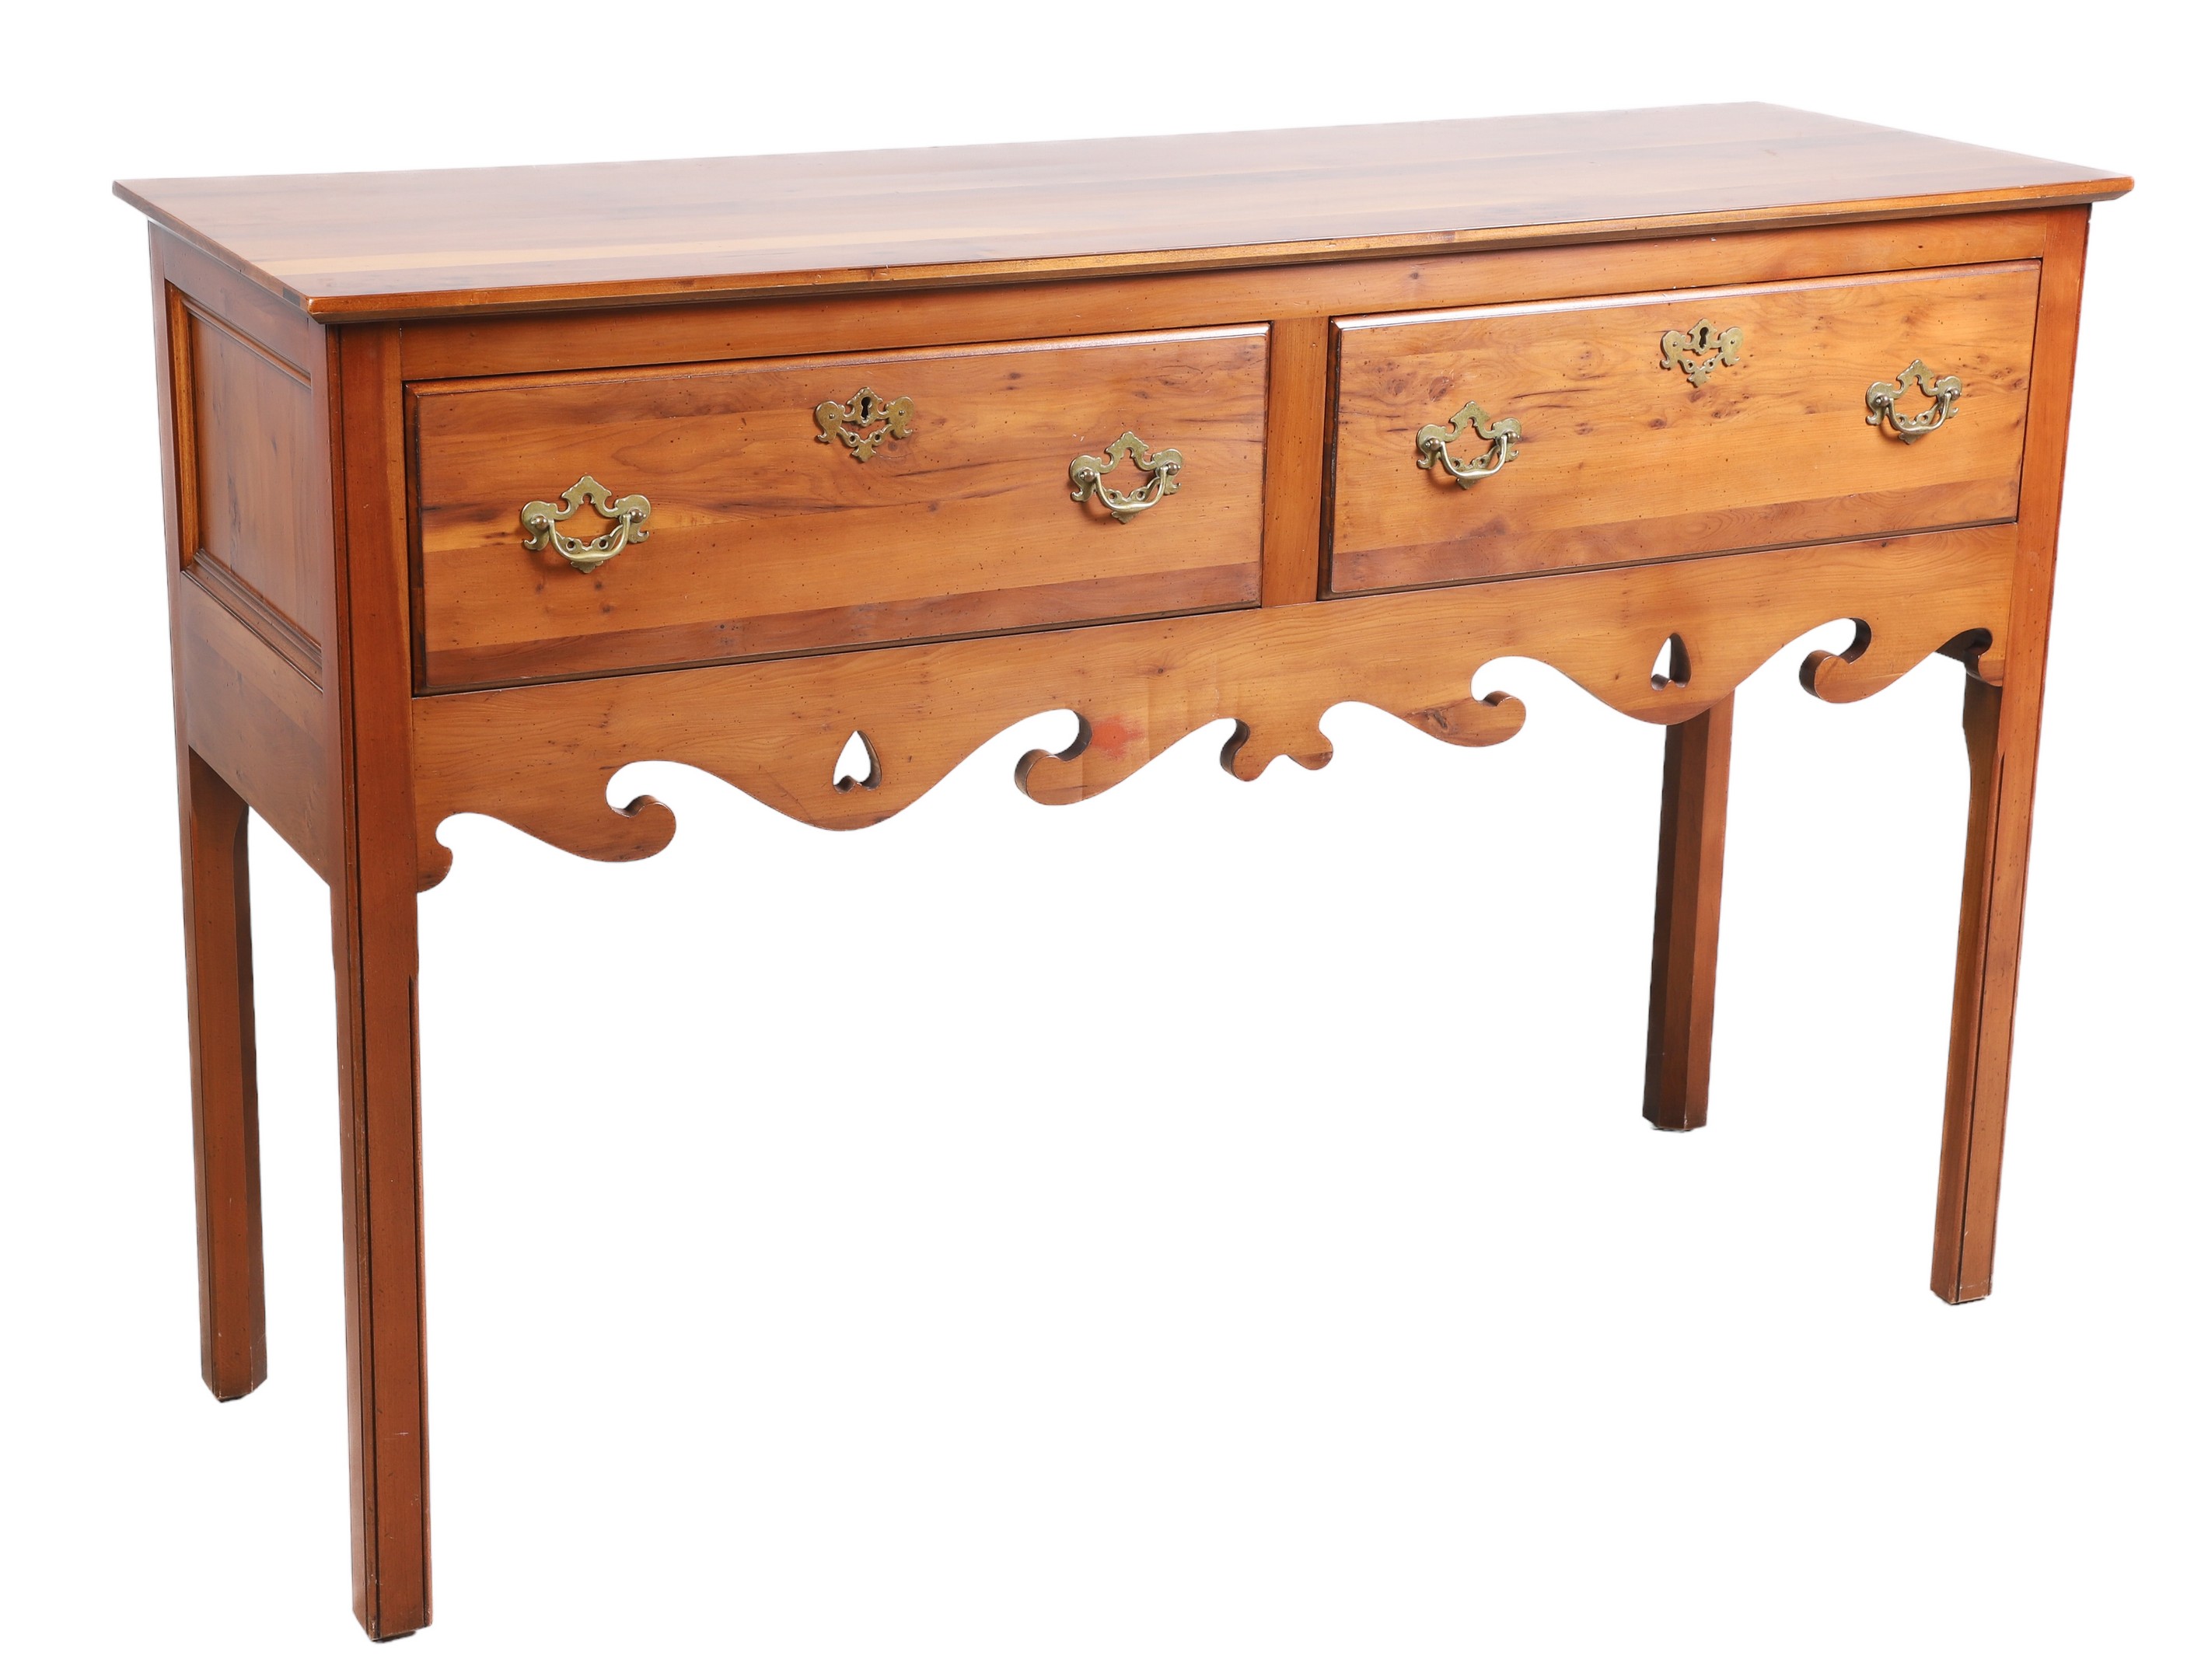 Wright Table Co cherry sideboard, two